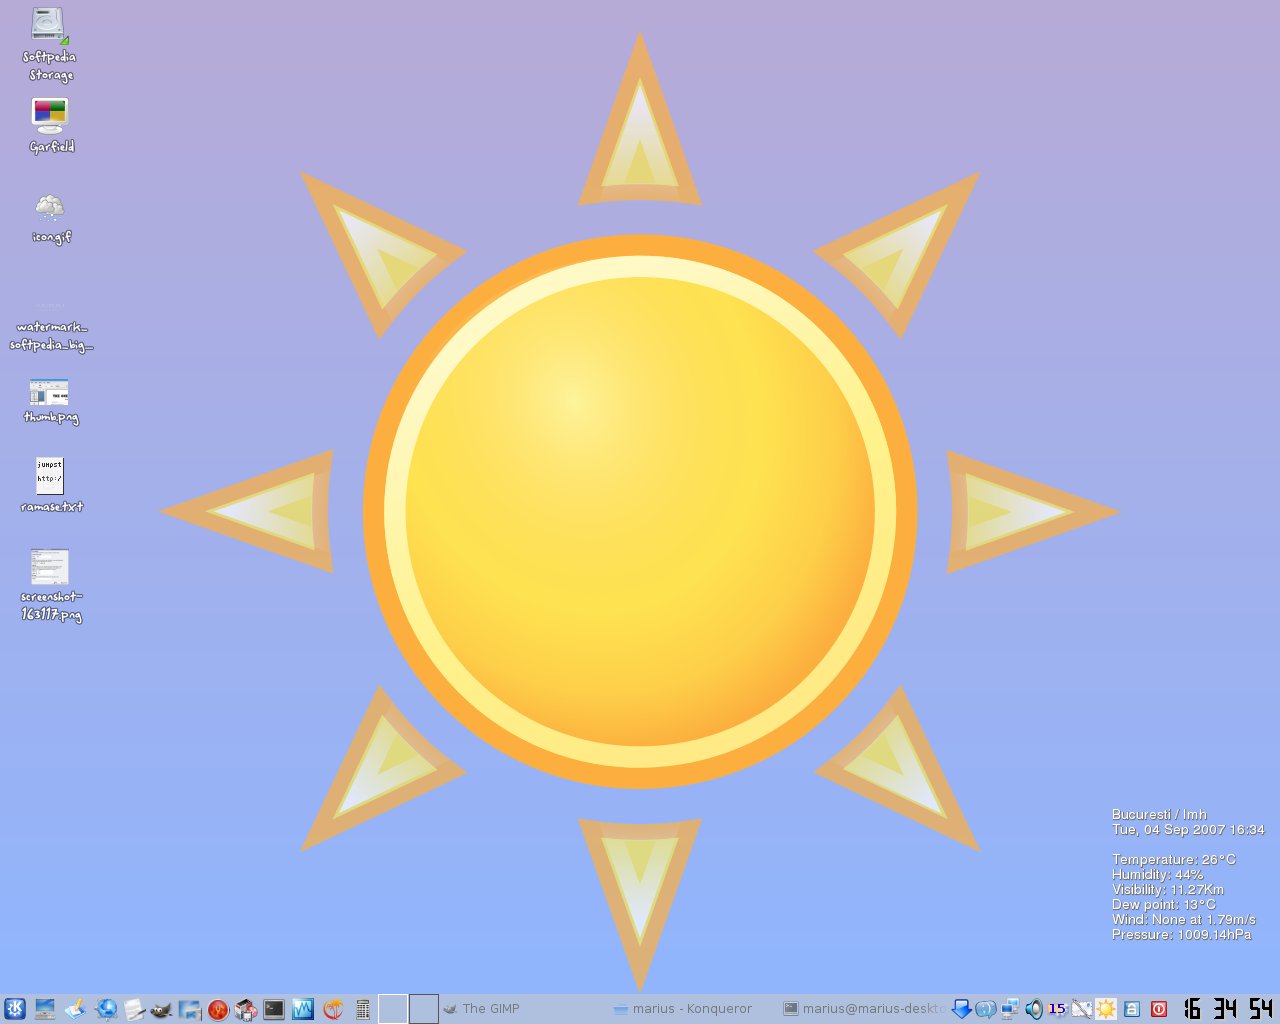 Screenshot 2 of Weather wallpaper. The image below has been reduced in size.